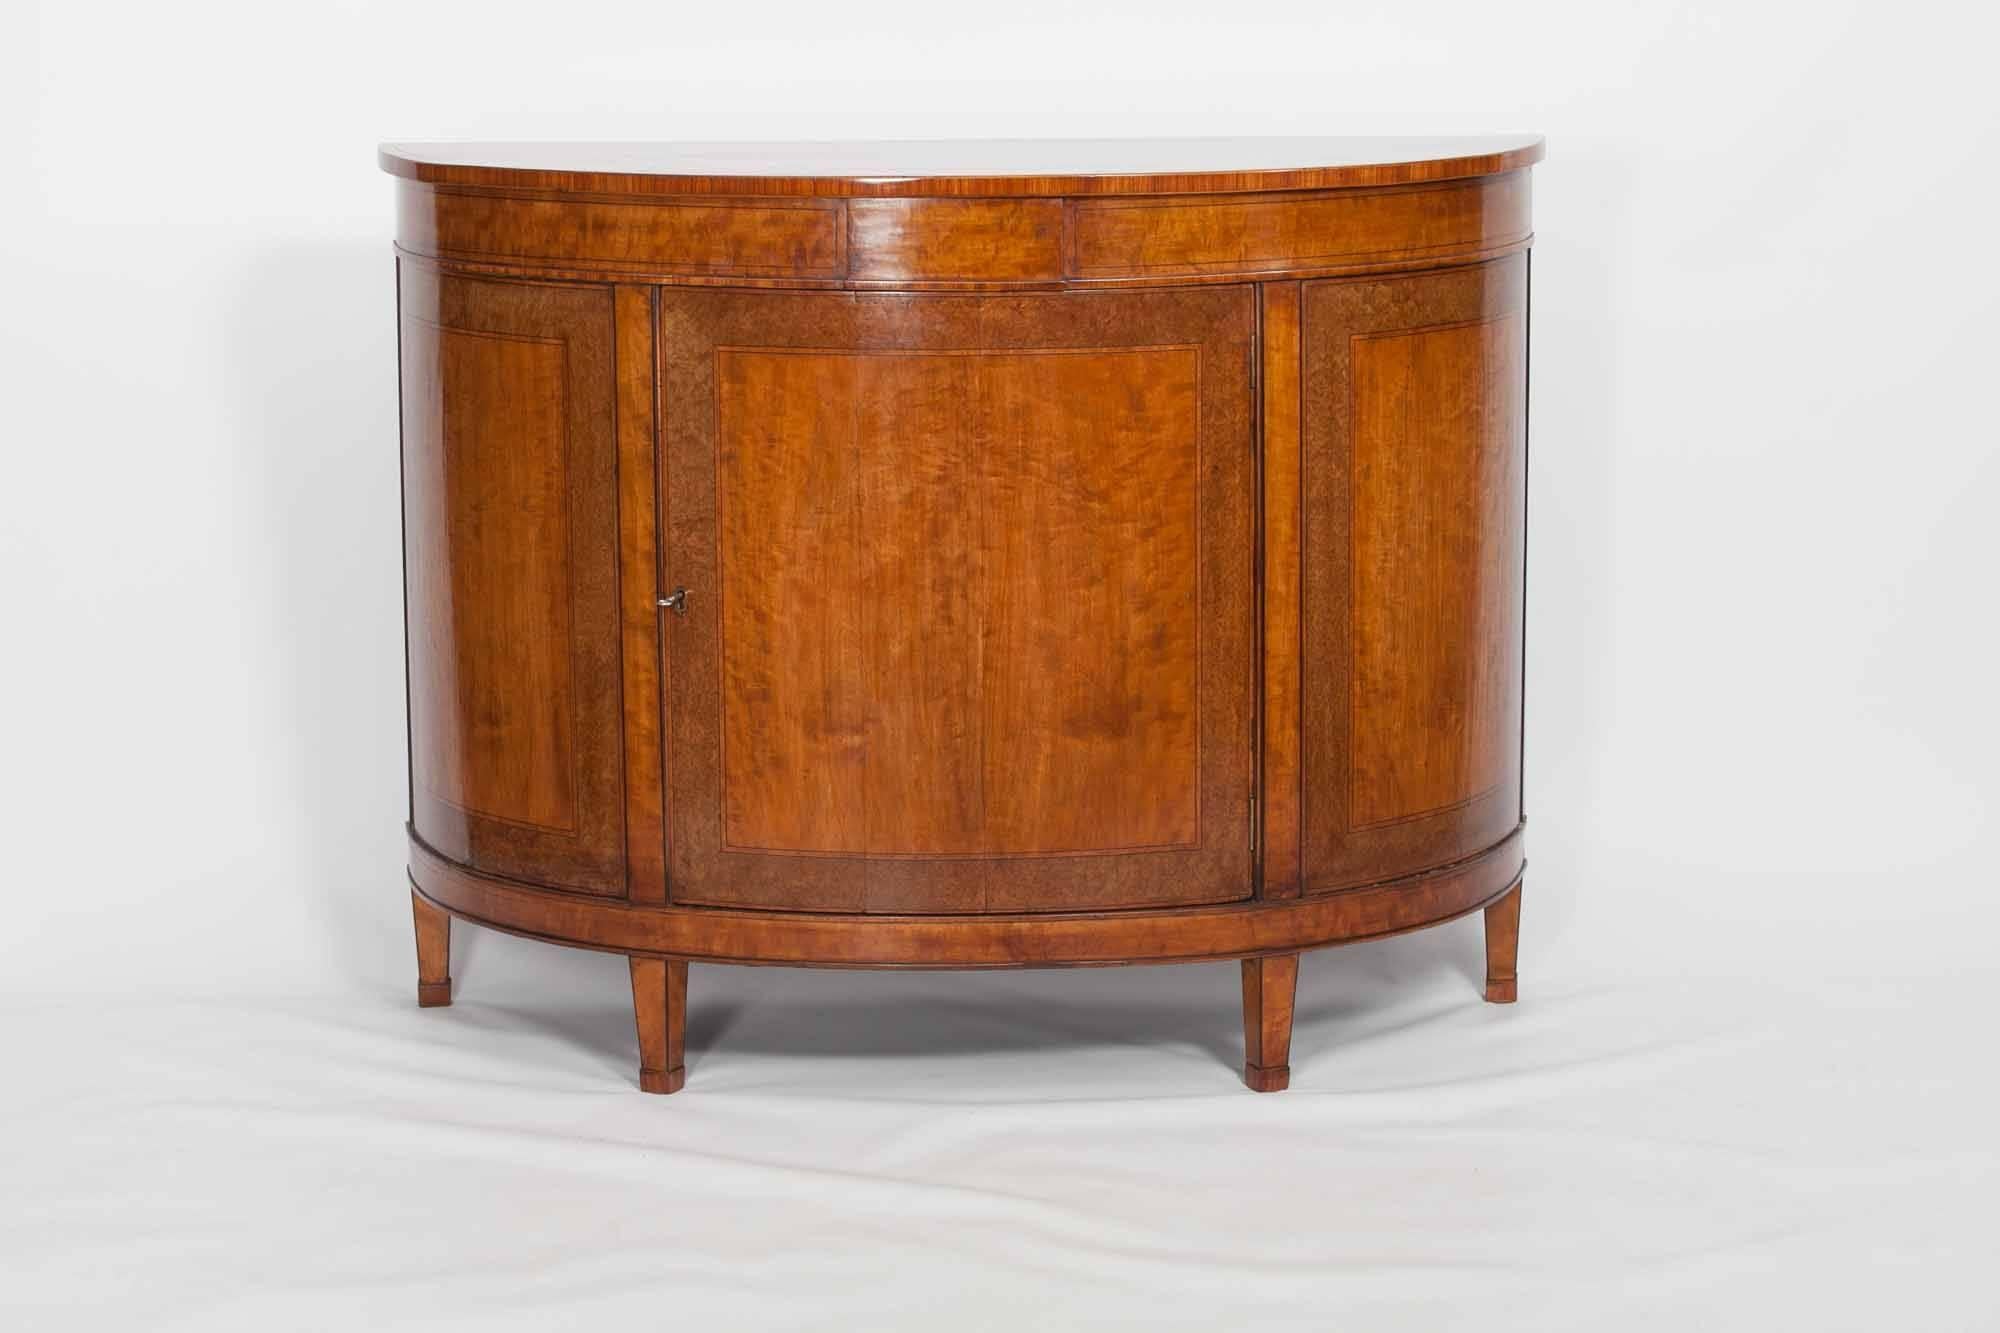 Early 19th century Regency demilune satinwood commode. The top and bow-fronted doors cross-banded with burr walnut and inlaid with fruitwood. Containing one interior shelf and terminating on four tapering legs, circa 1820.